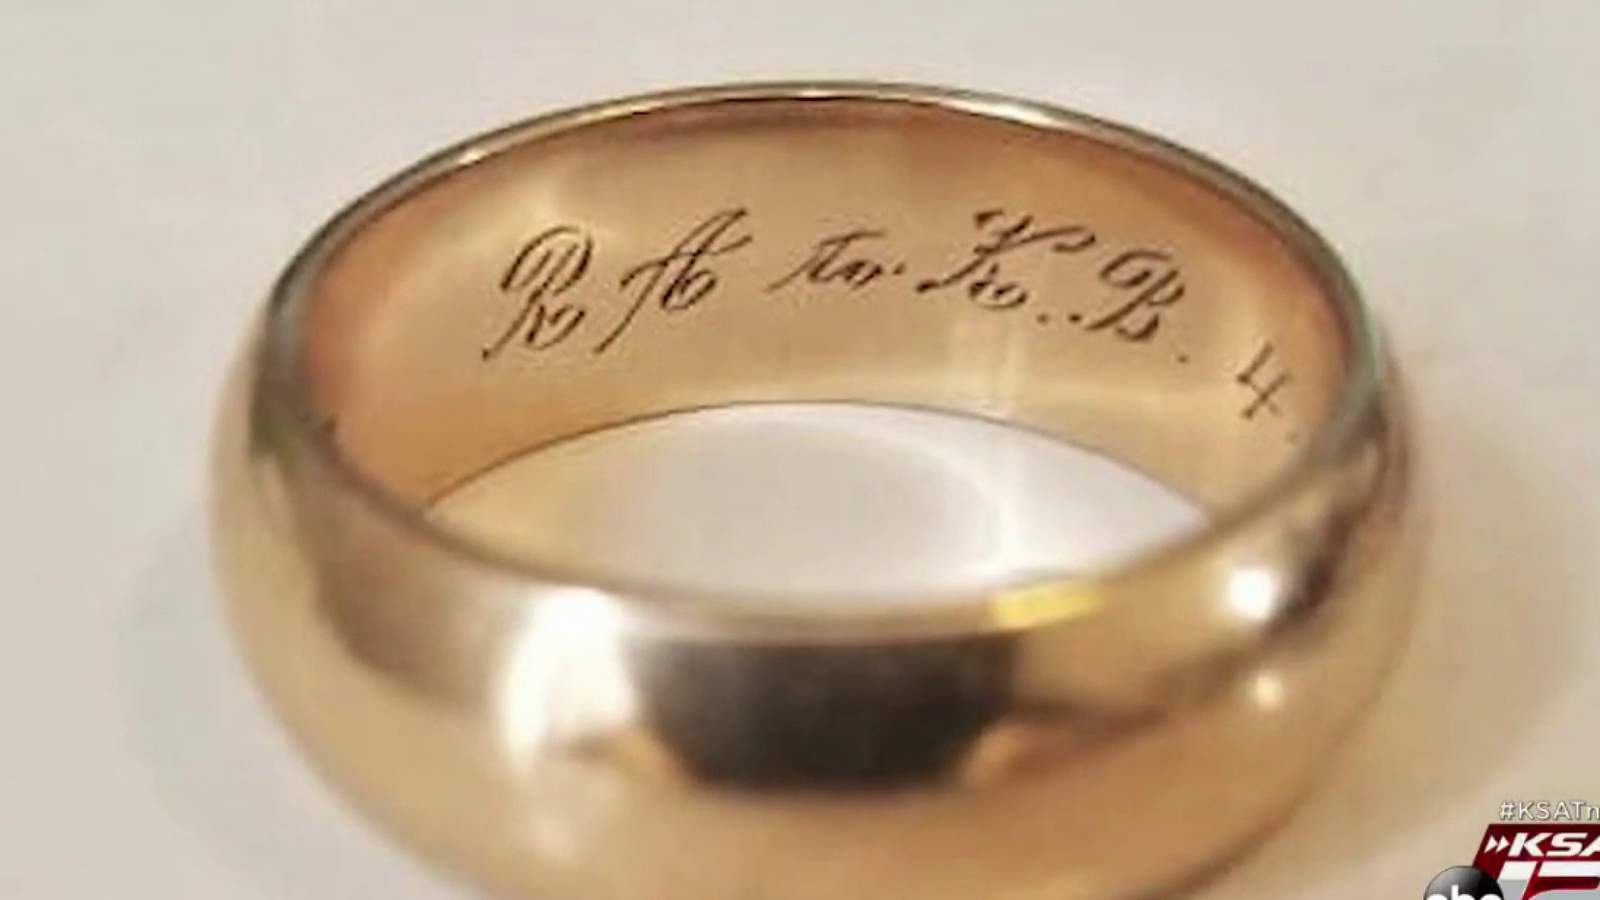 Wedding ring lost nearly 50 years ago returned